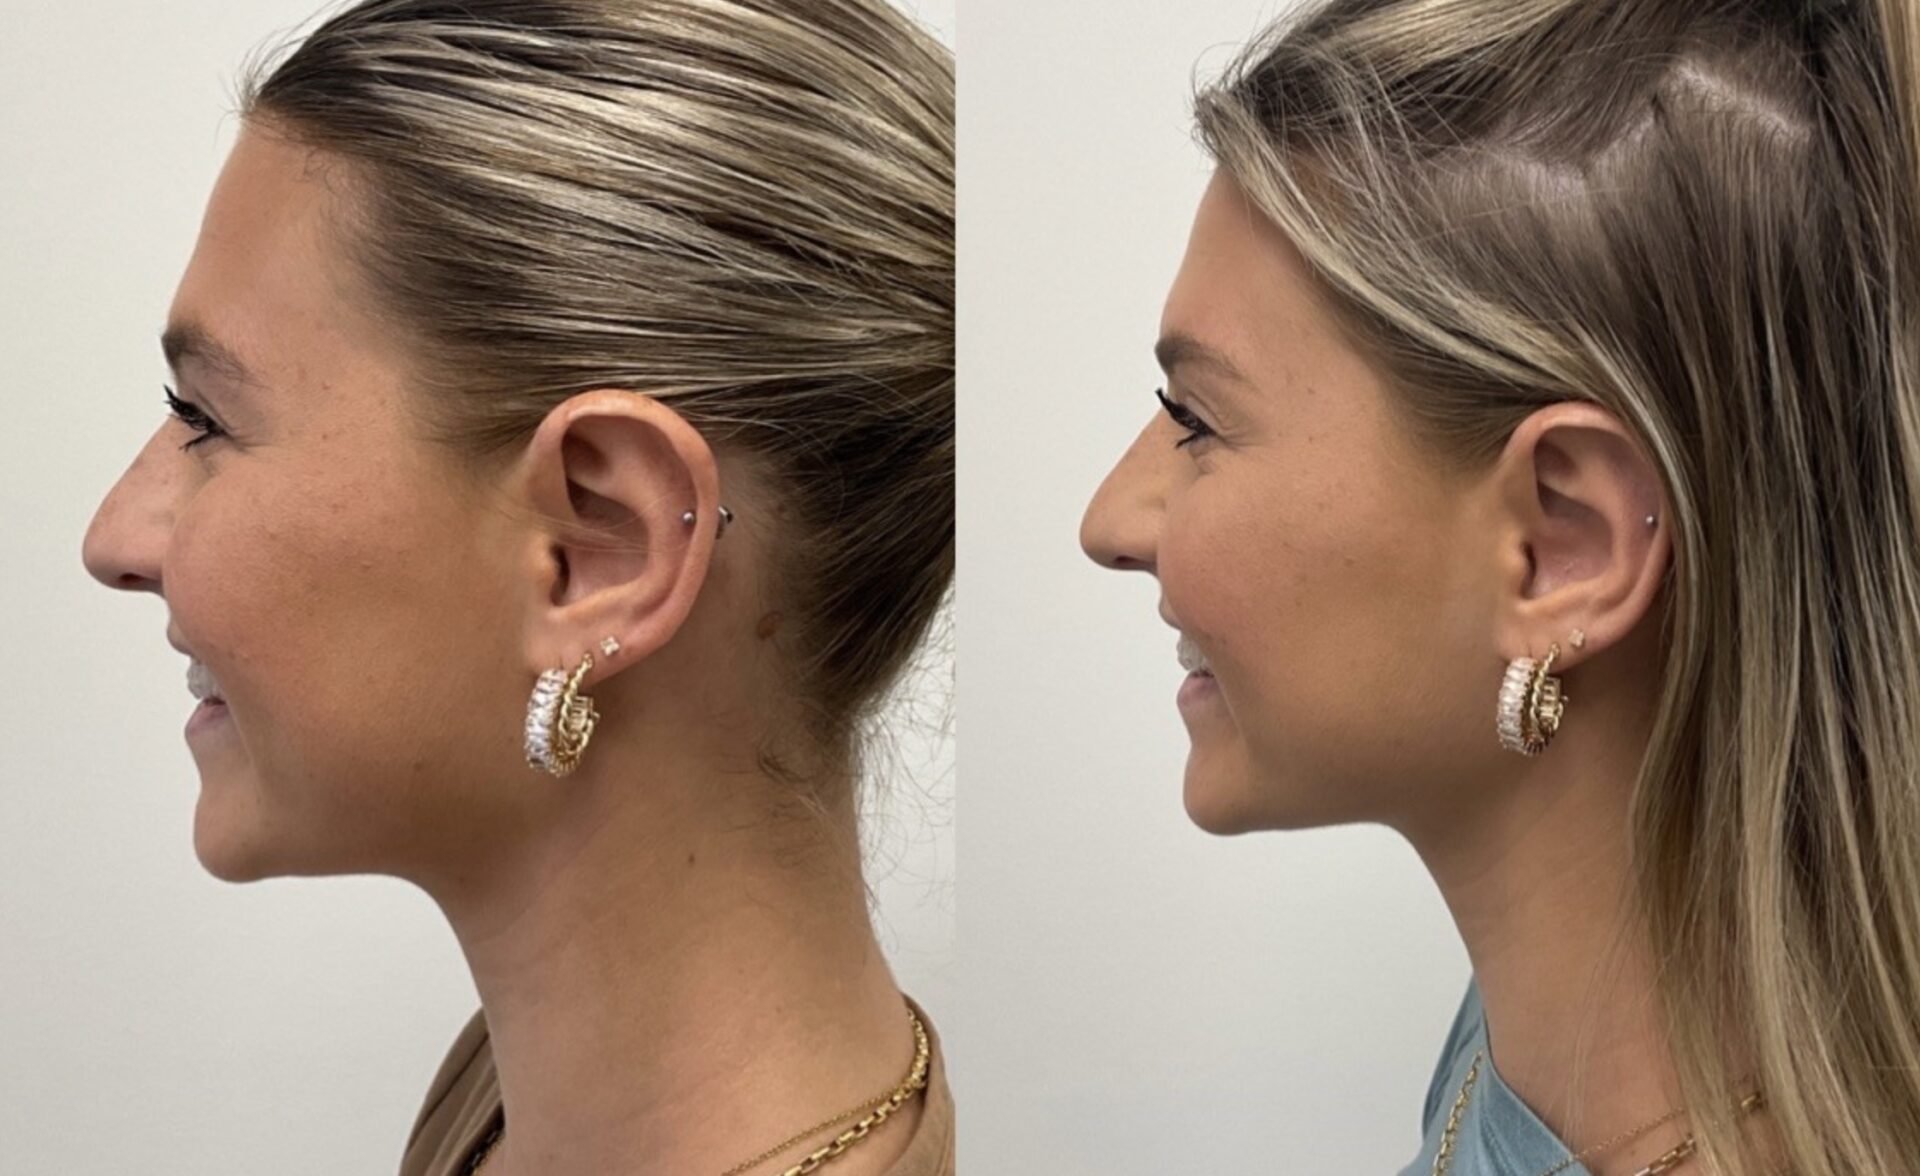 Before and after skin treatment | Medical Spa West Palm Beach, FL